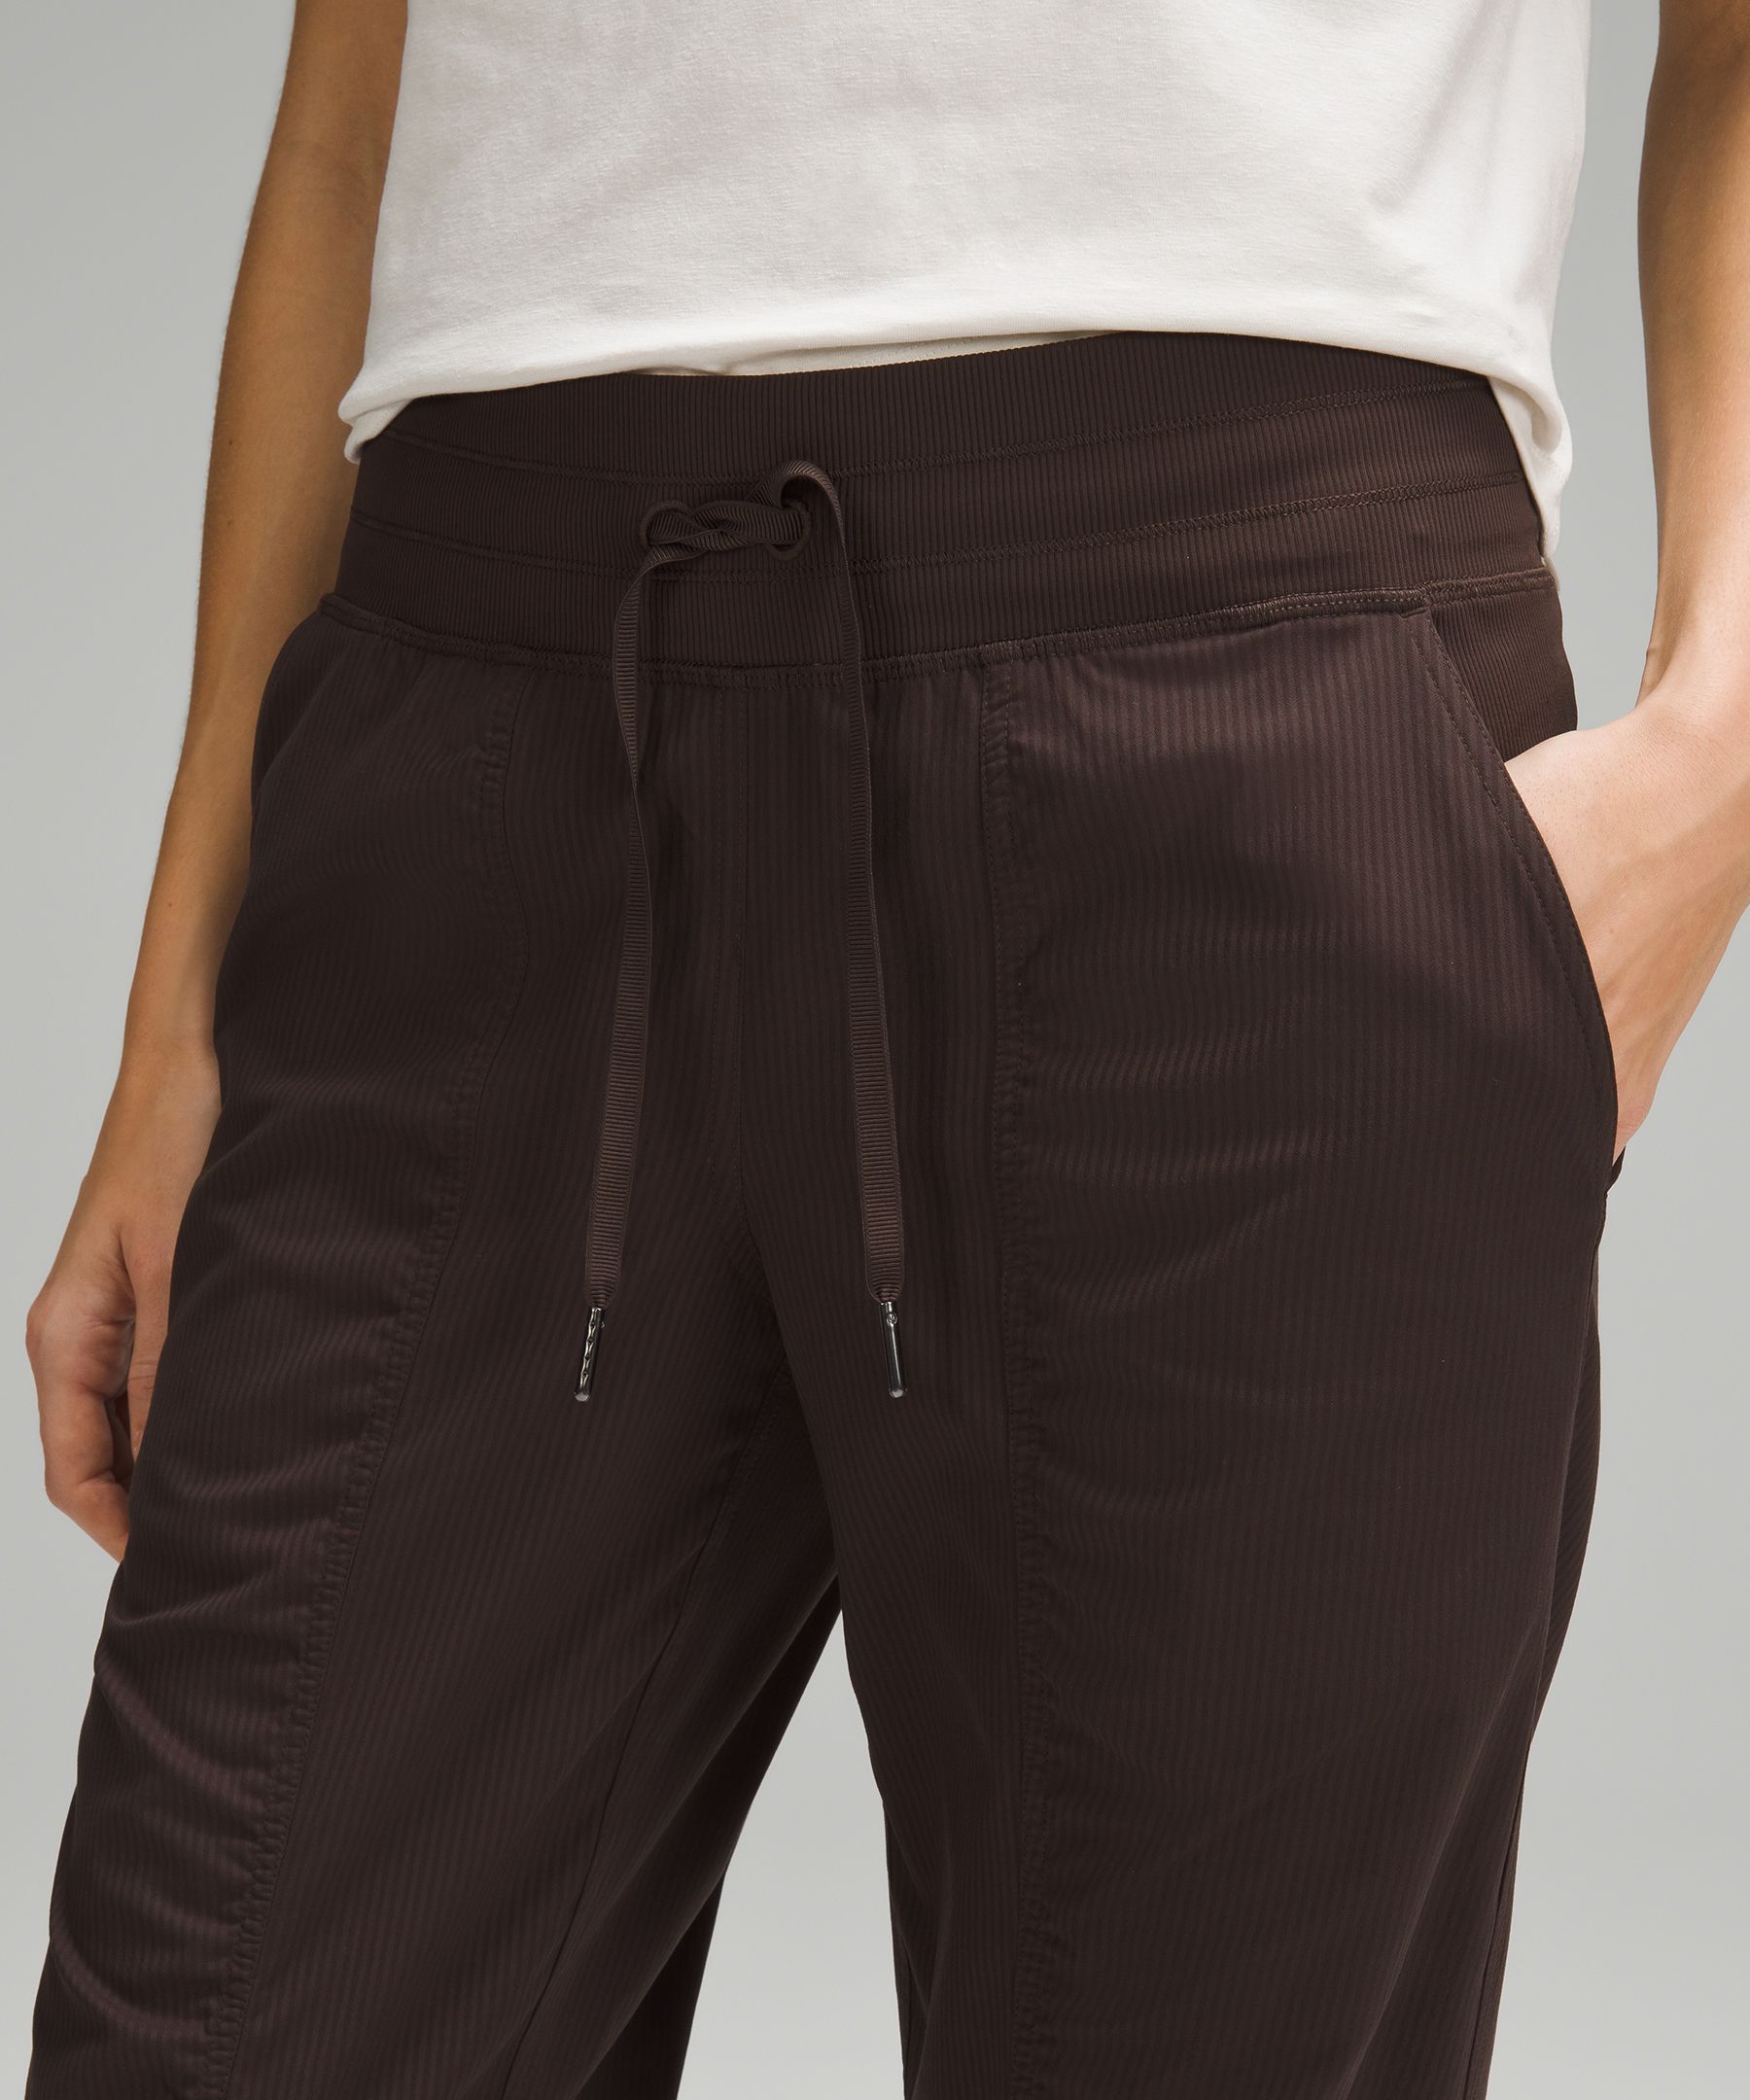 GO BUY THESE RIGHT NOW! lululemon dance studio pants!!! they are the b